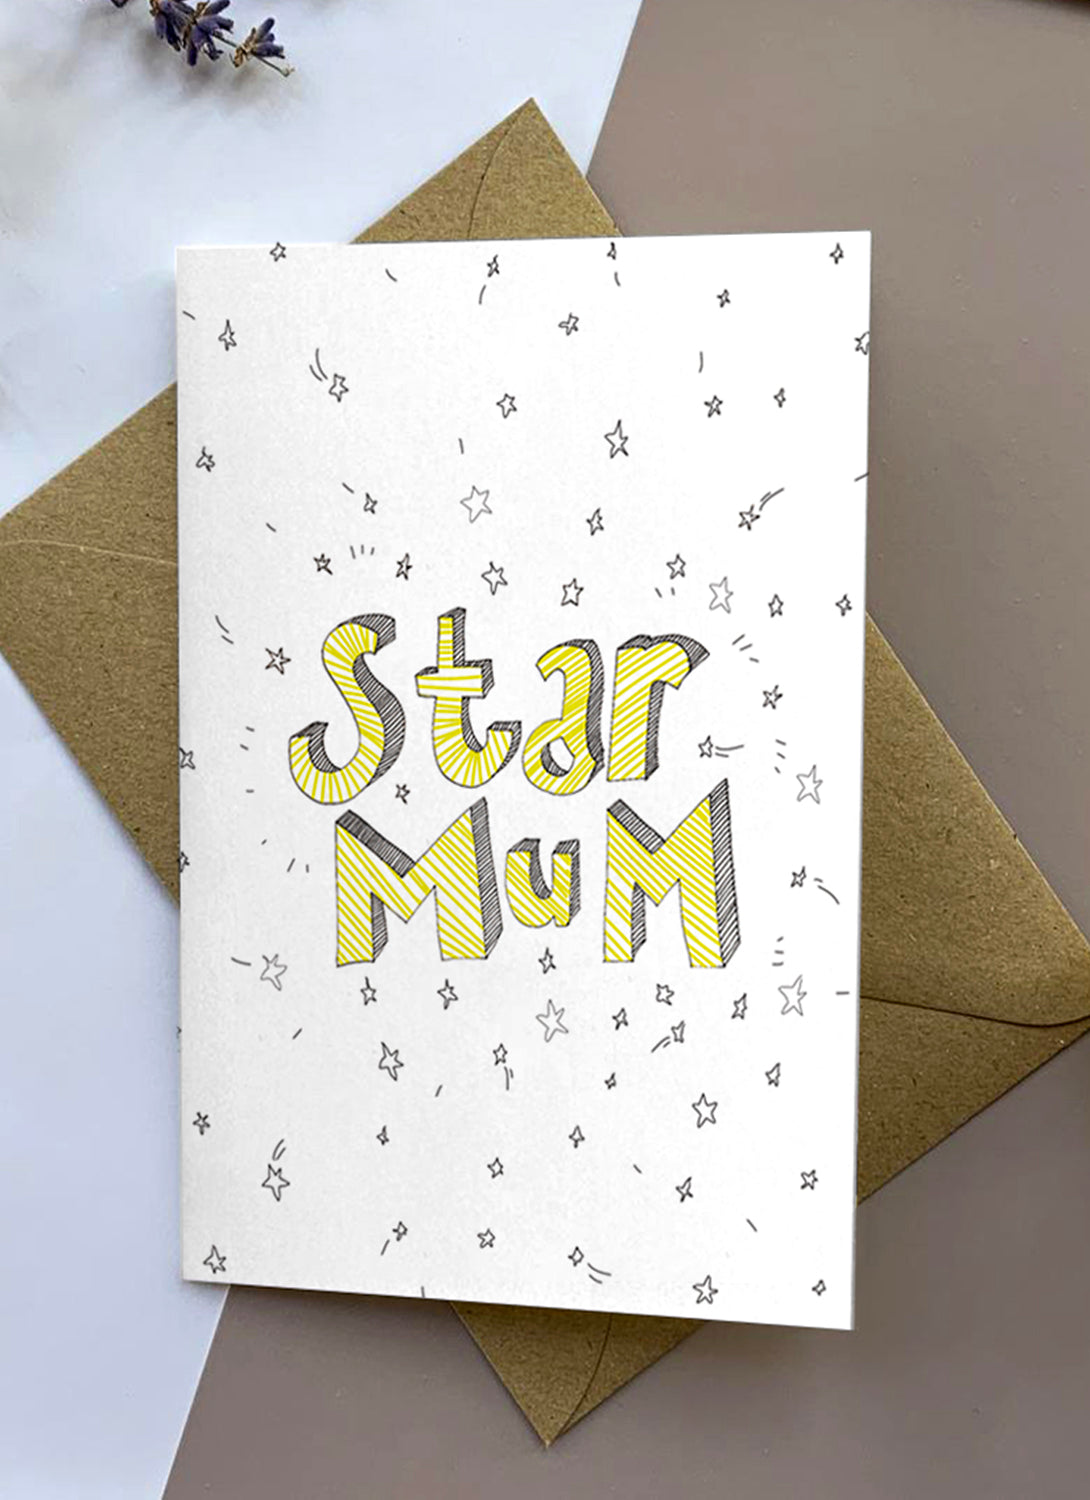 Star Mum Mother's Day card